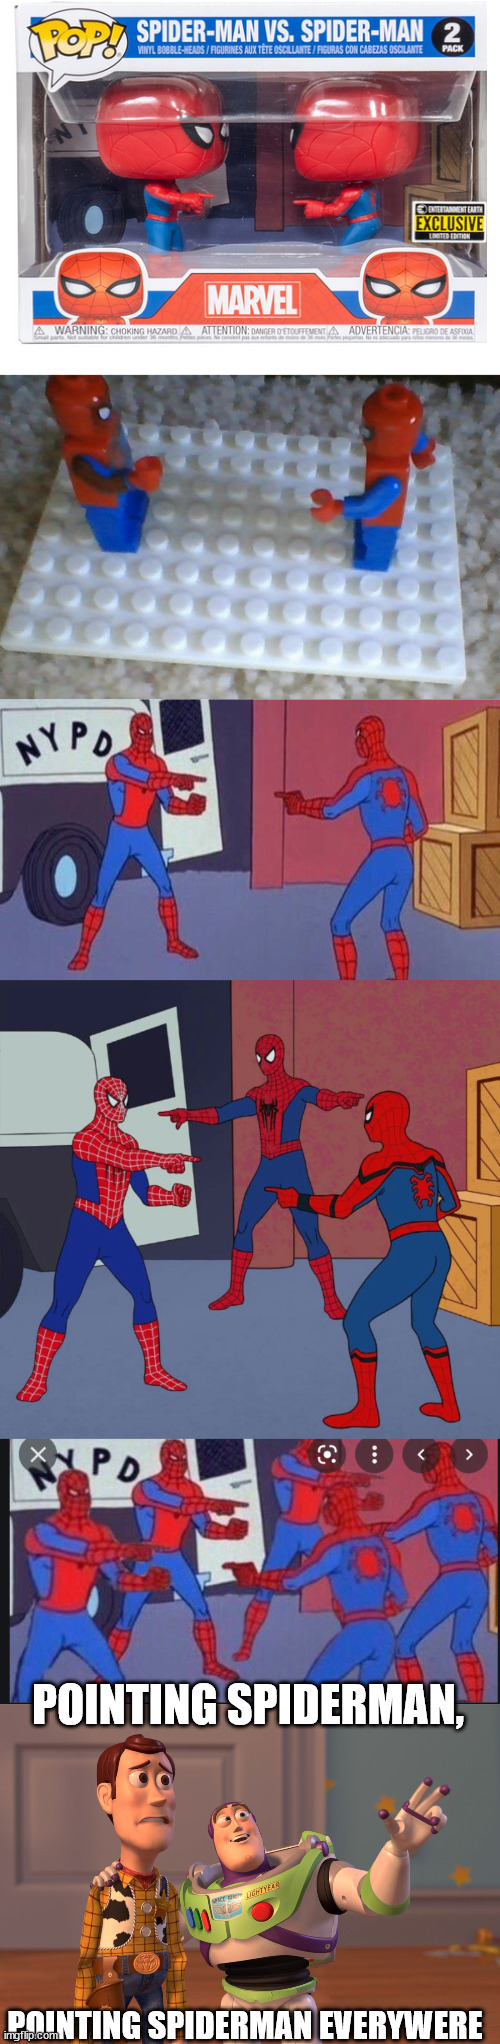 POINTING SPIDERMAN, POINTING SPIDERMAN EVERYWERE | image tagged in blank white template,spiderman pointing at spiderman,spider man triple,memes,x x everywhere | made w/ Imgflip meme maker